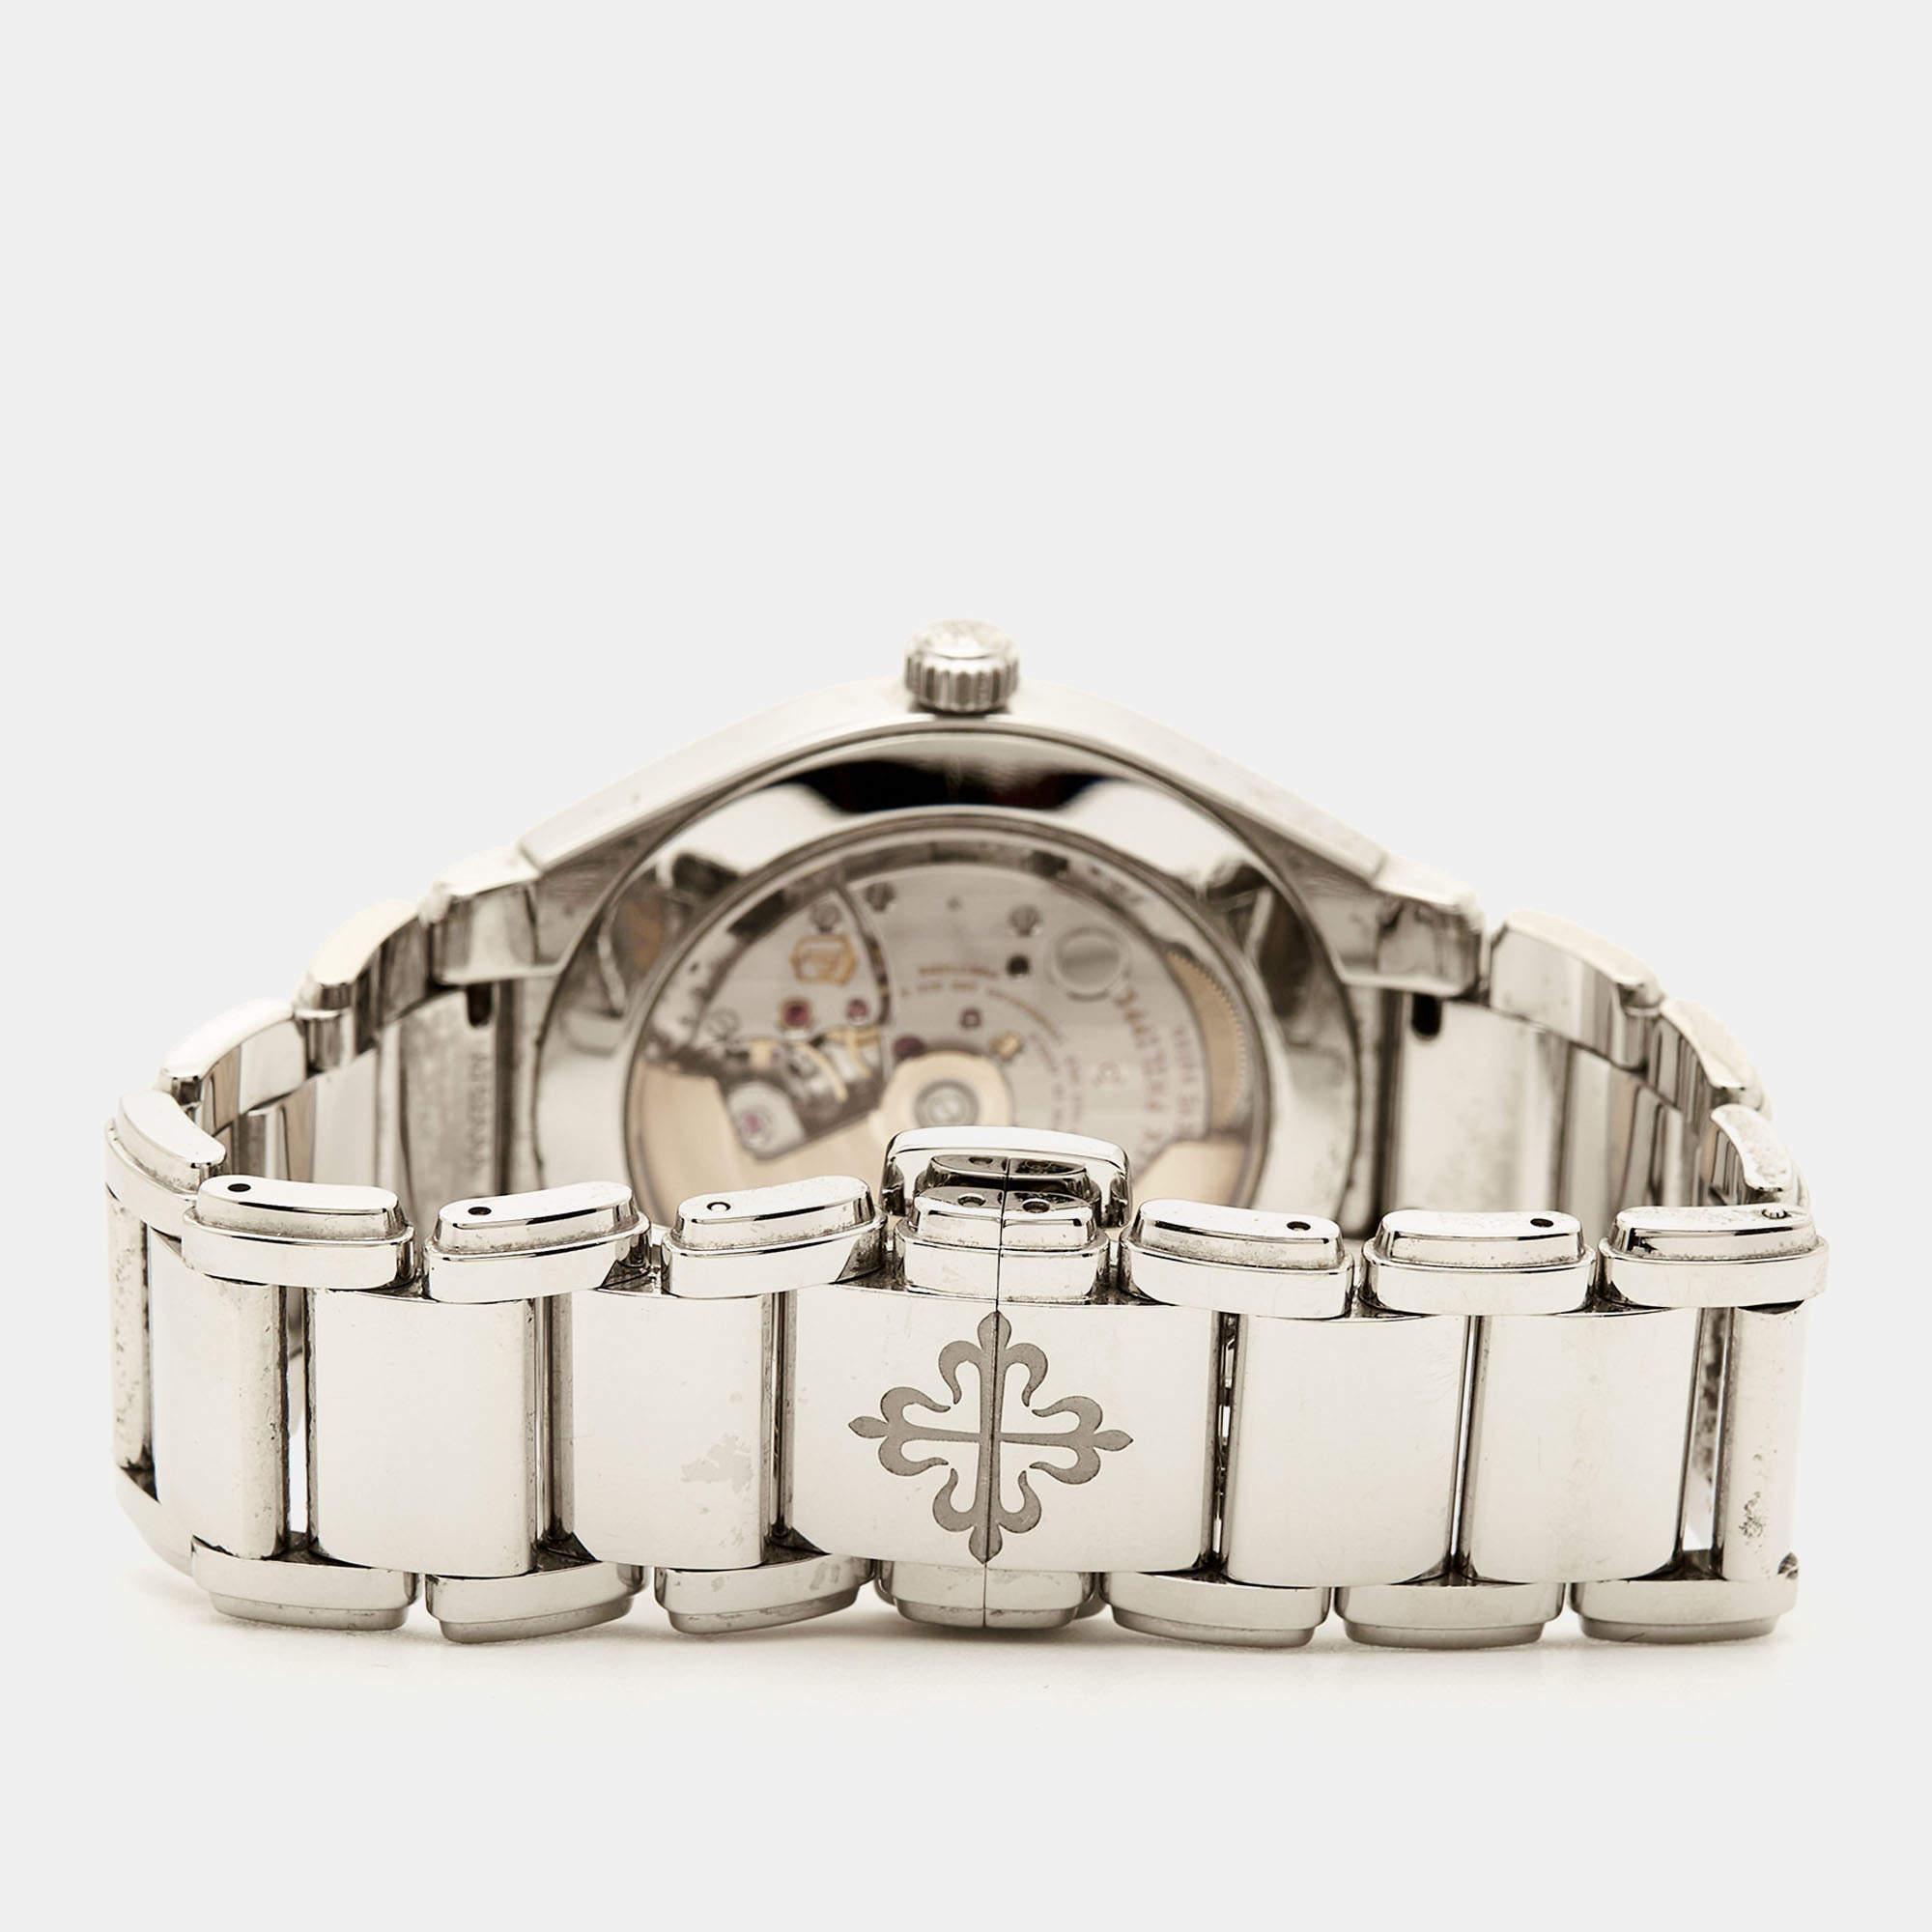 Designed with classic watchmaking codes, this women's wristwatch from Patek Philippe is a great choice if you're looking for an investment-worthy timepiece. It's from the Twenty-4 line — a much-loved watch collection by Patek that aims to accompany